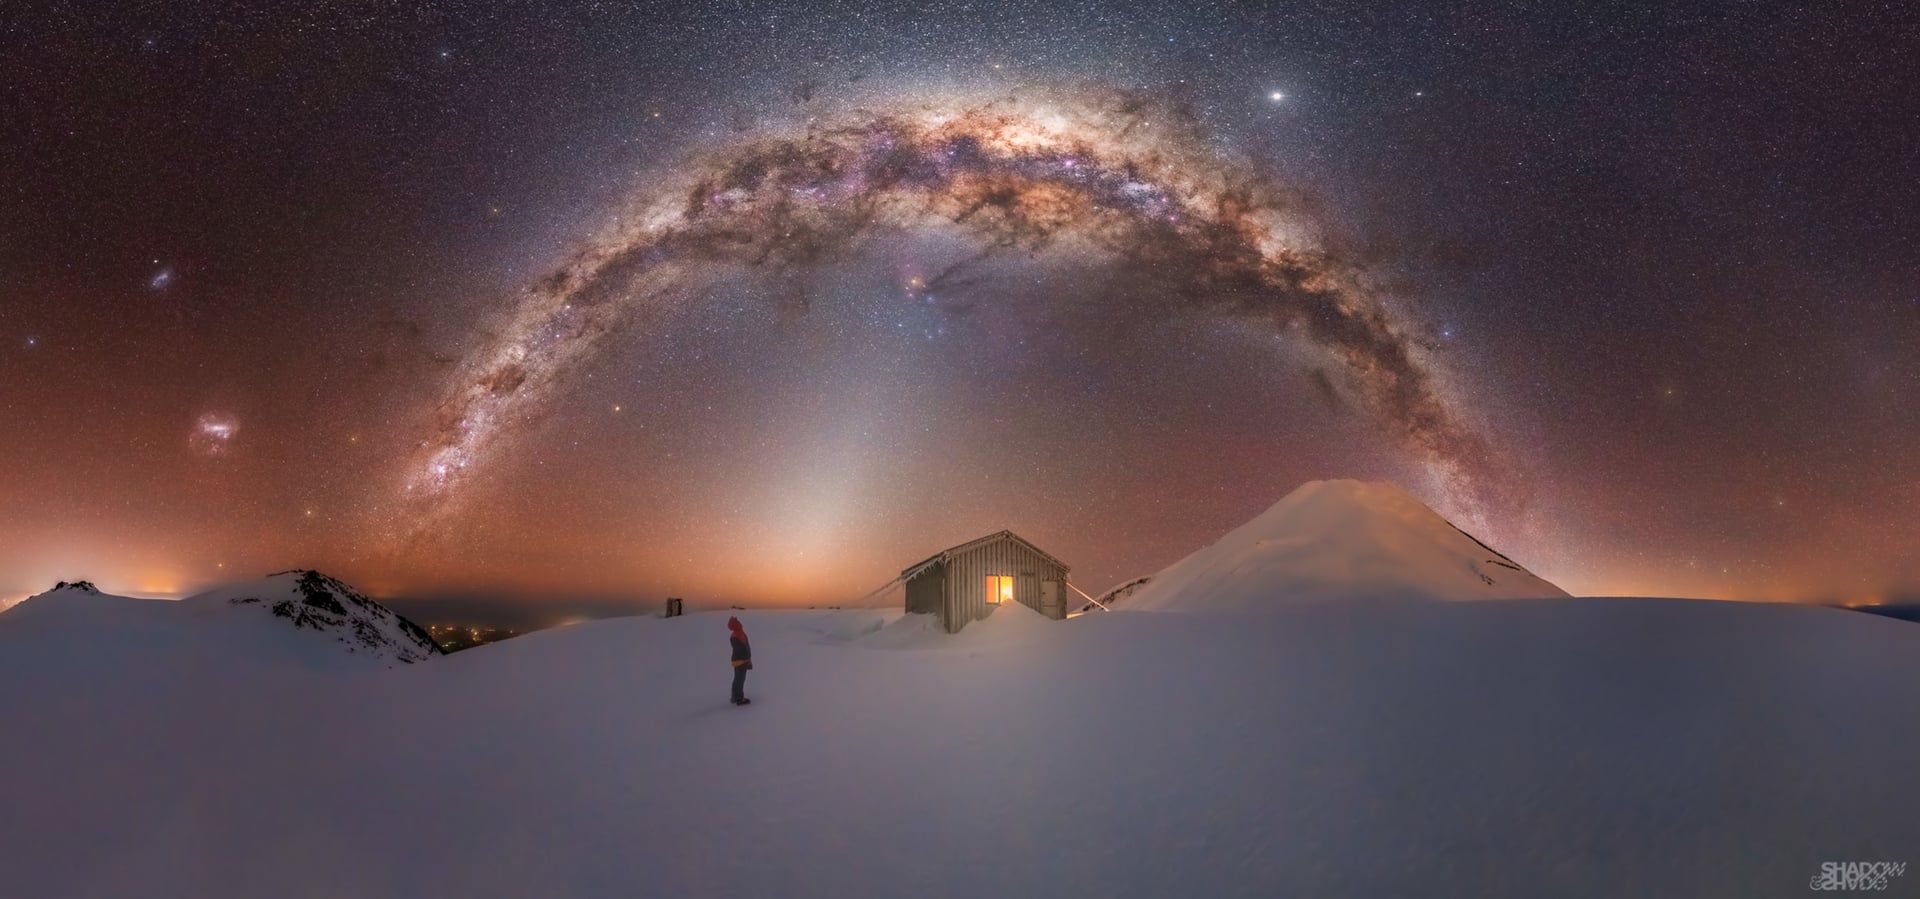 New Zealand Milky Way photographer of the Year 